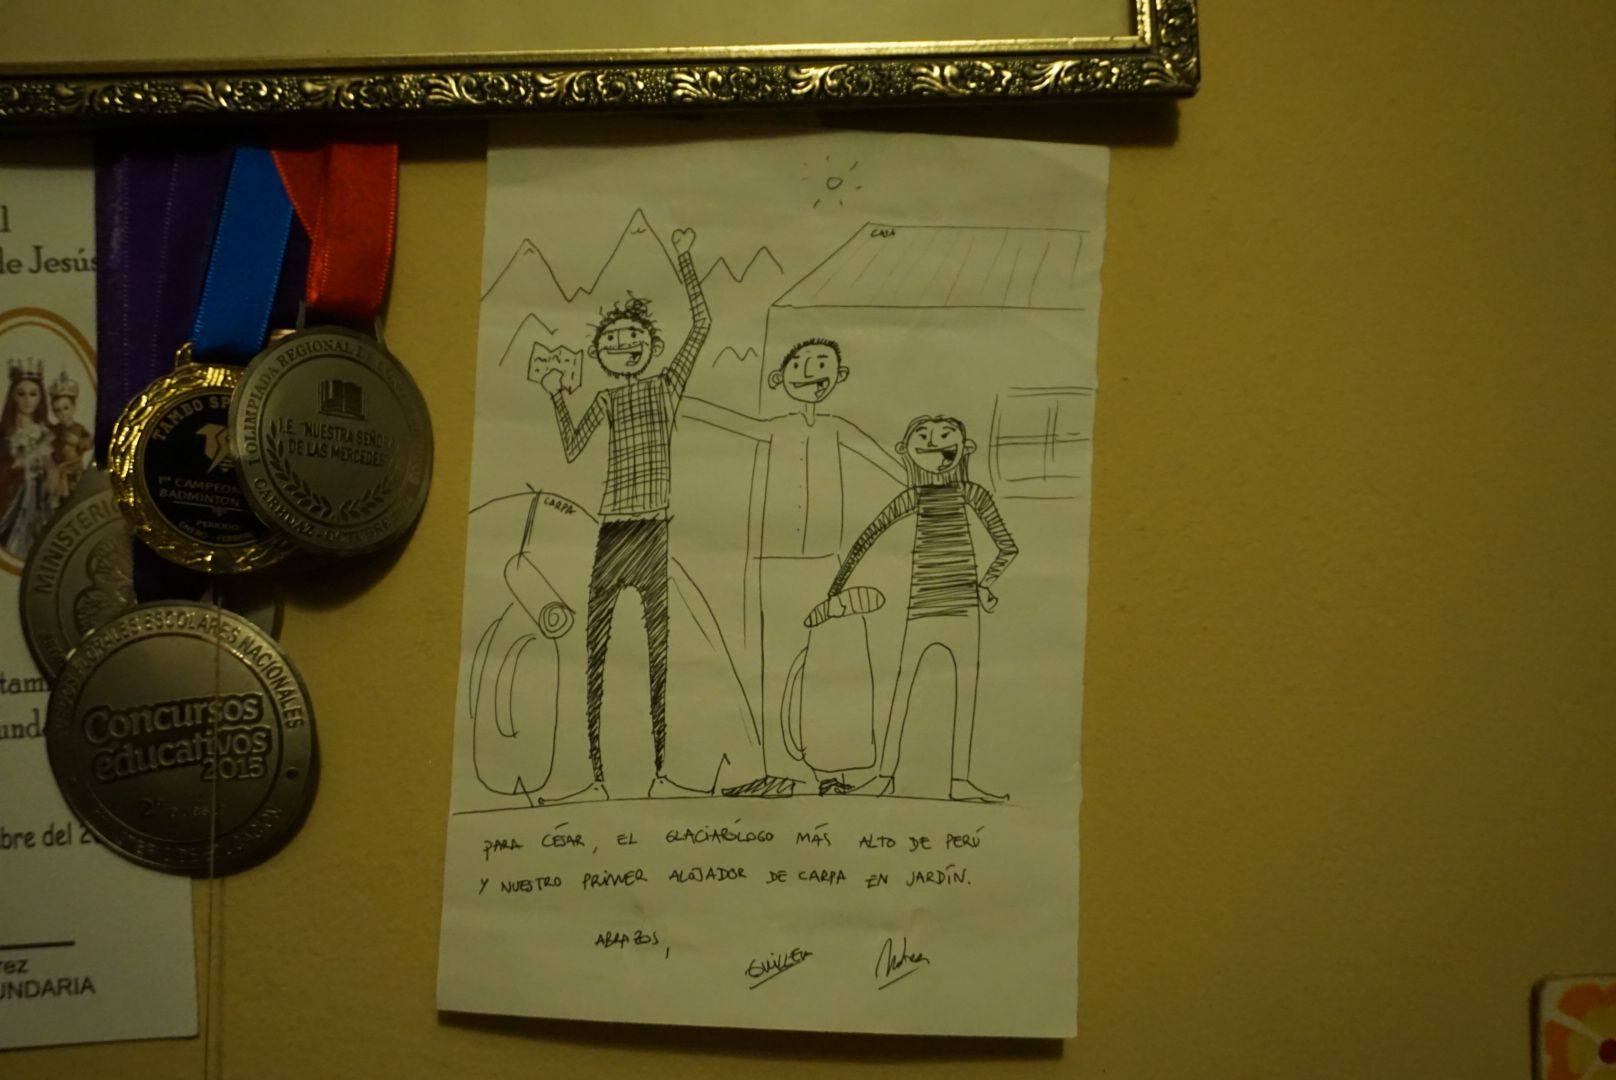 A close-up of César’s office wall: medals accompanied by a thank you note from backpackers who spent a night in César’s garden. Image by Audrey Fromson. Peru, 2019.